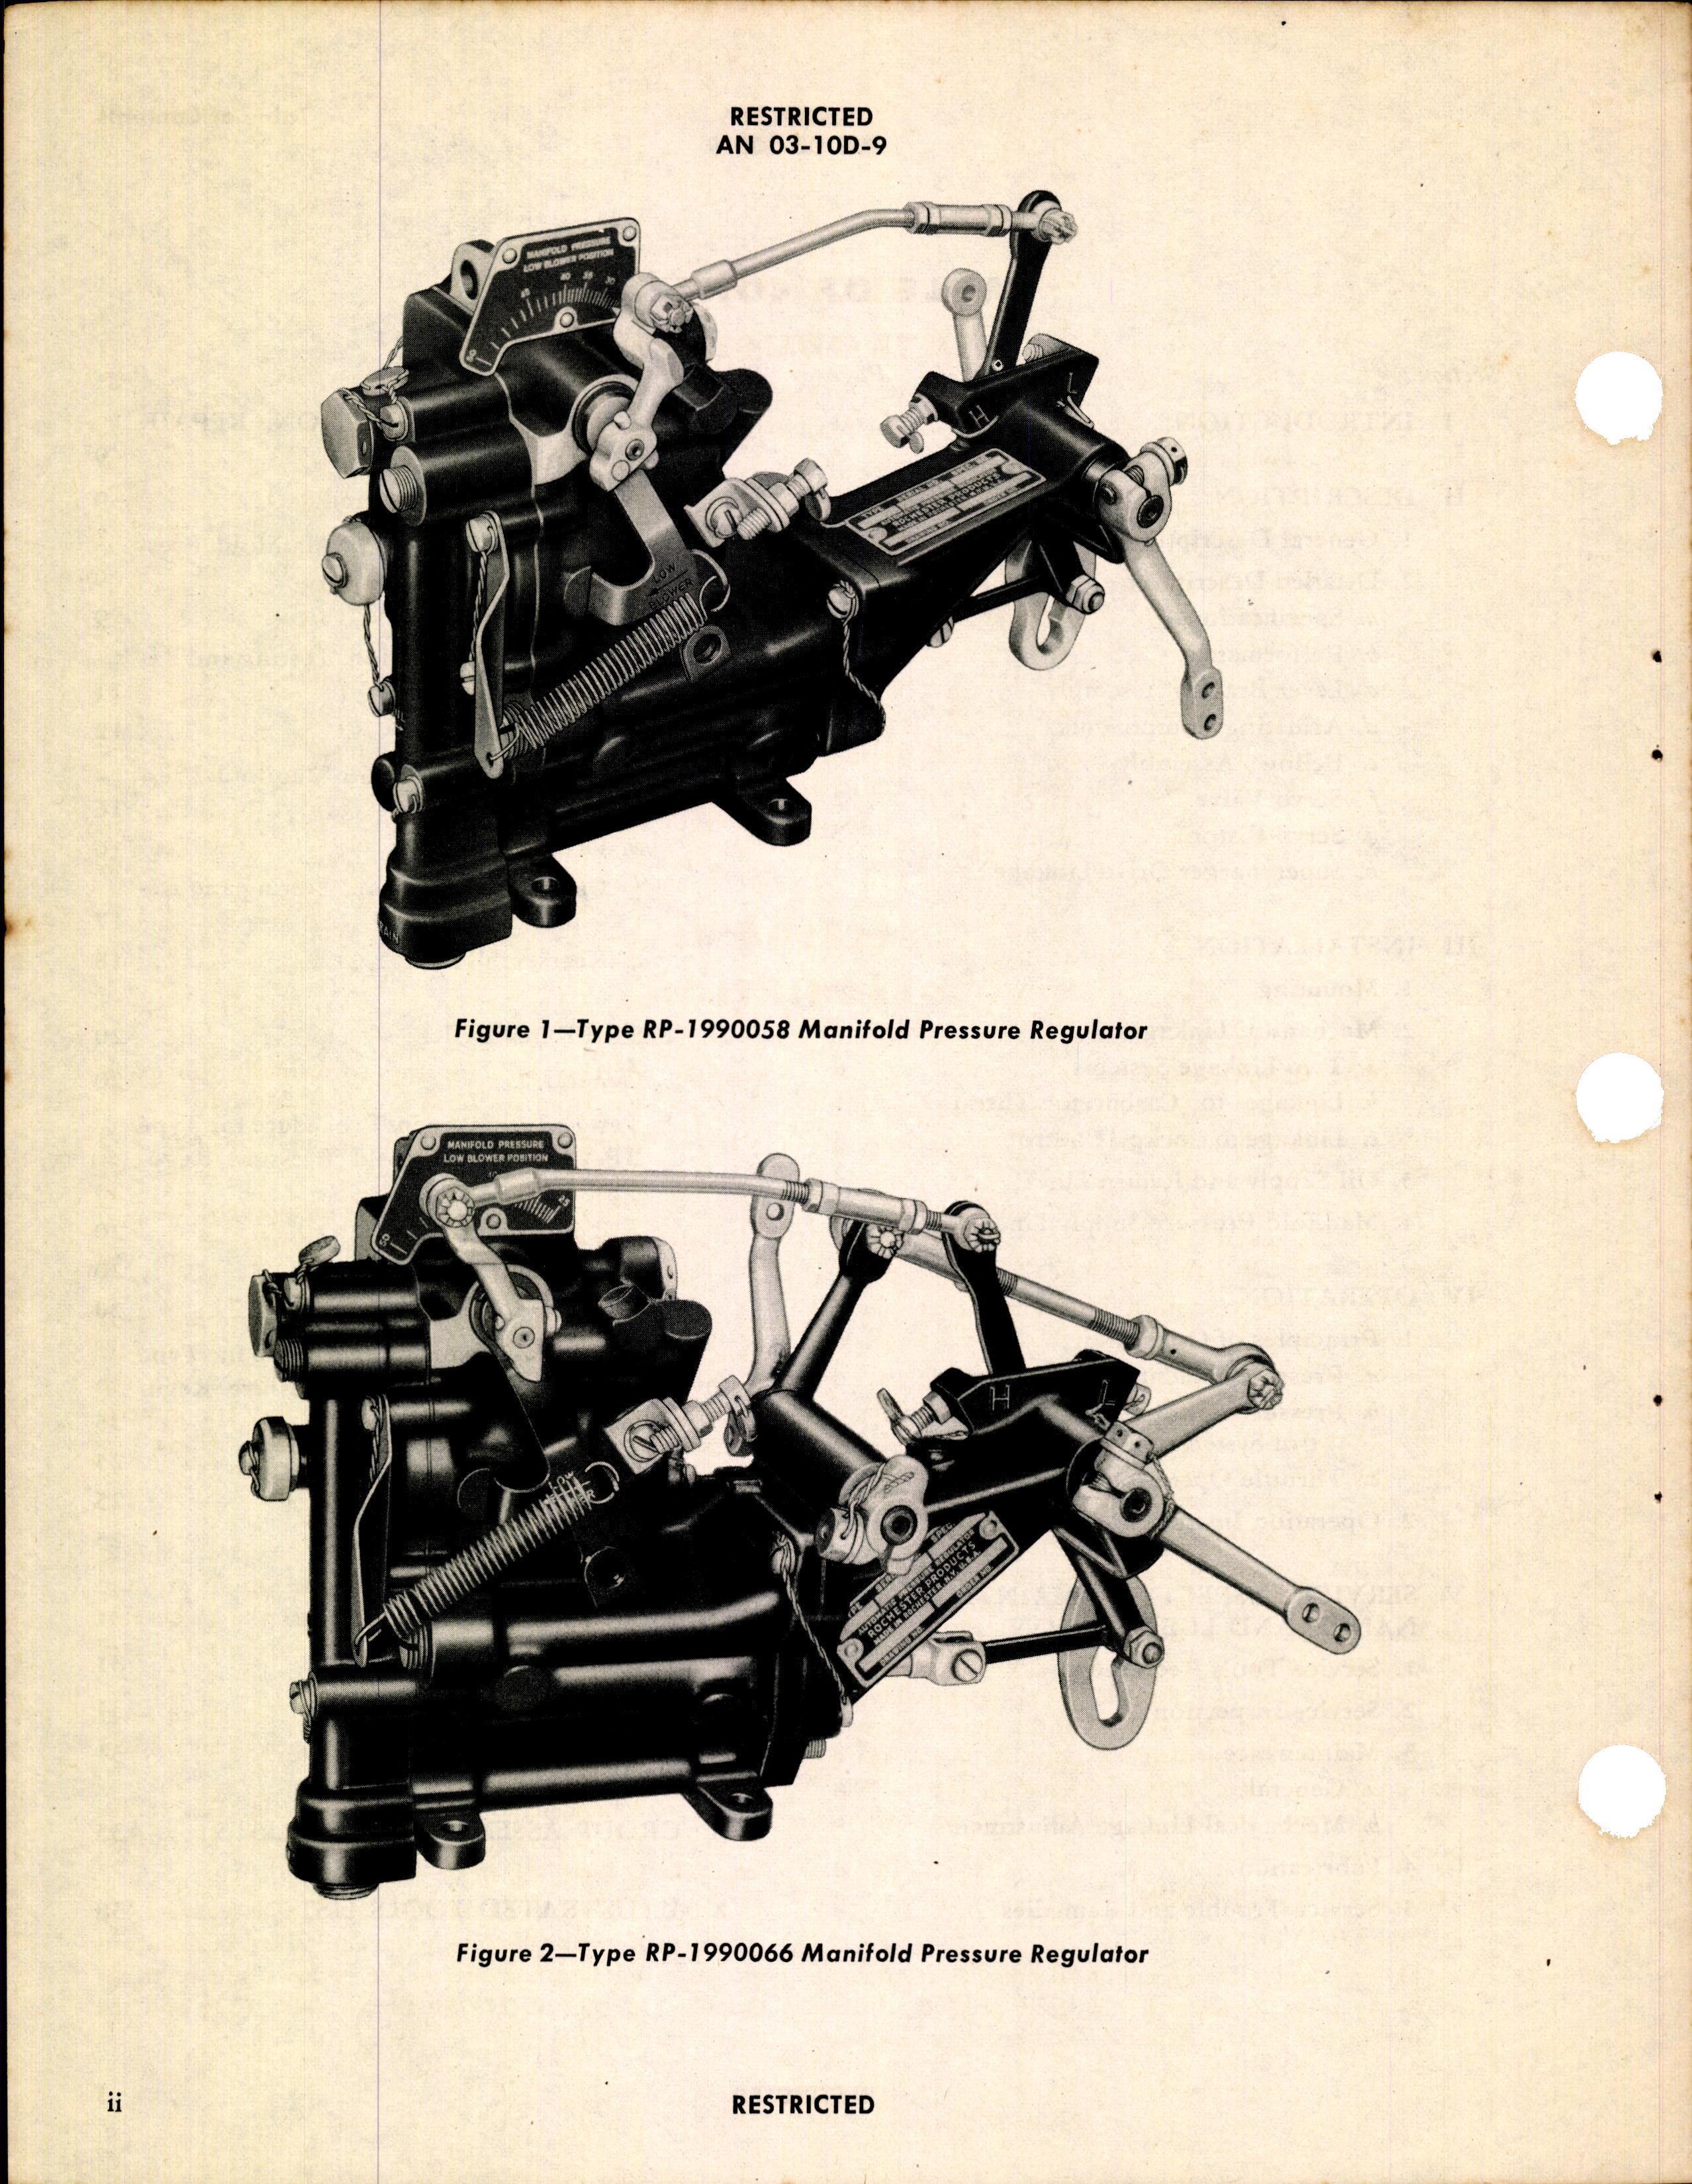 Sample page 6 from AirCorps Library document: Handbook of Instructions with Parts Catalog for Manifold Pressure Regulators